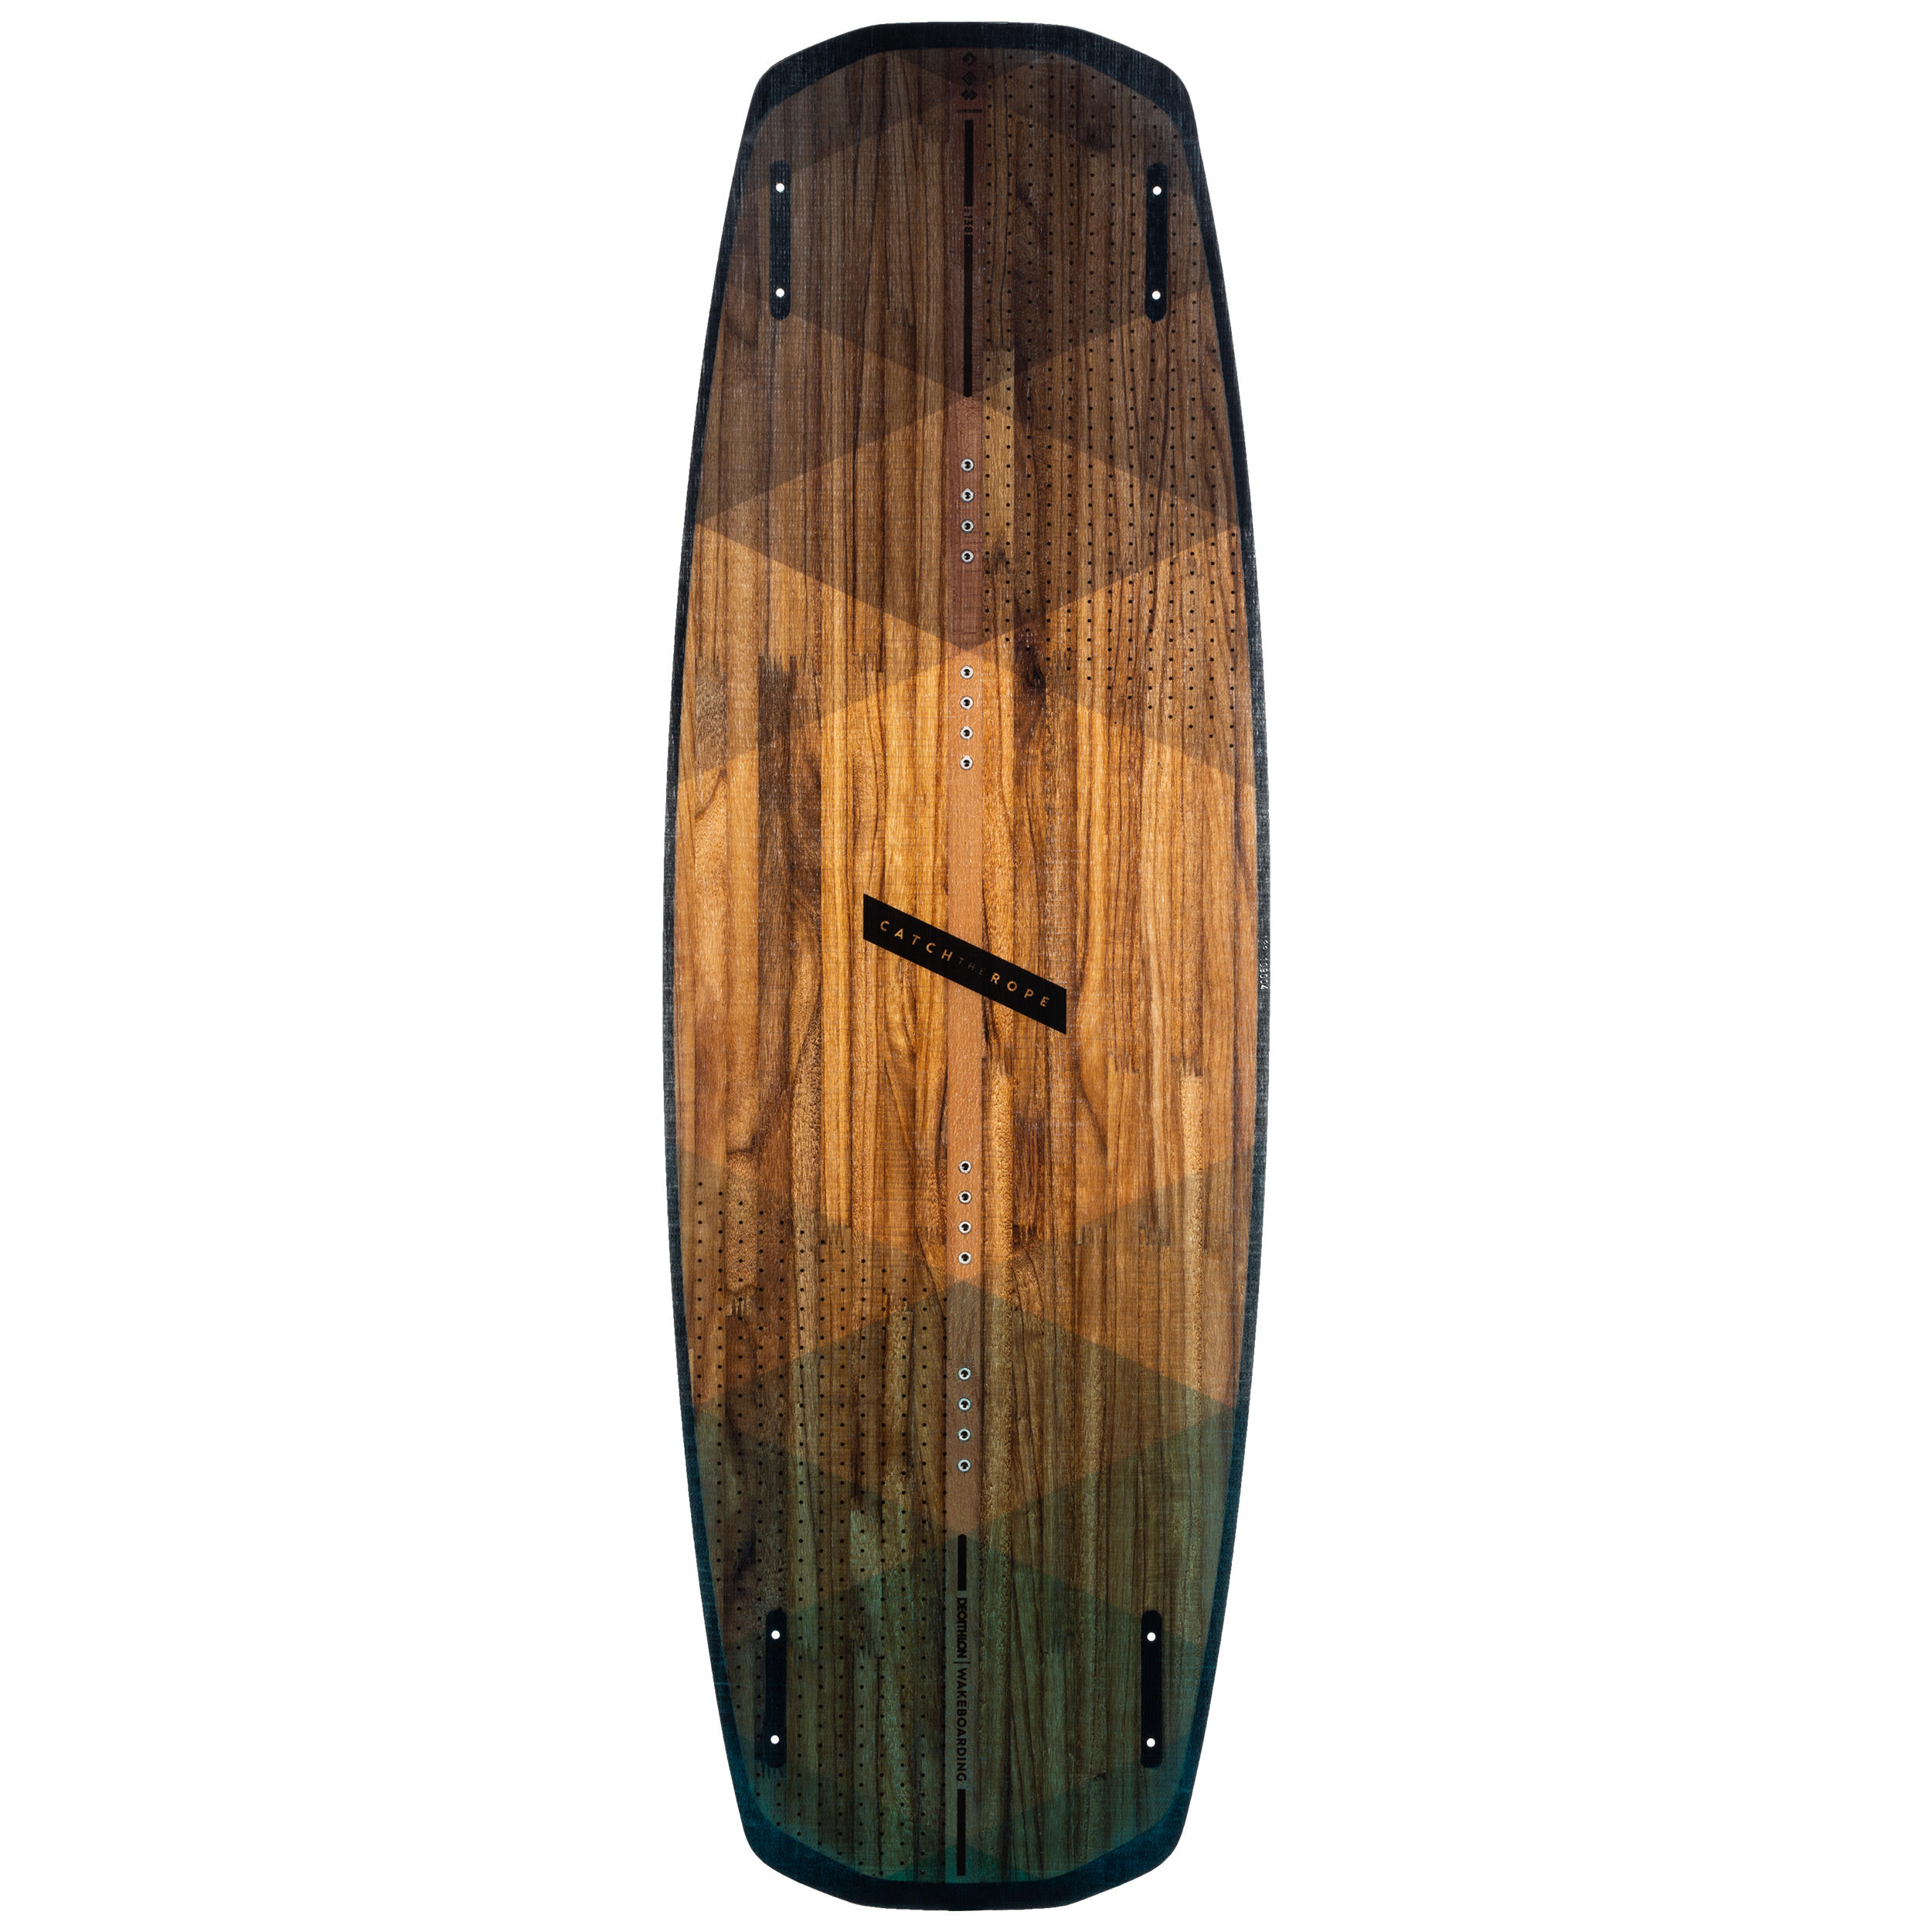 PLACĂ WAKEBOARD 500 138 CM 138 colac tractat